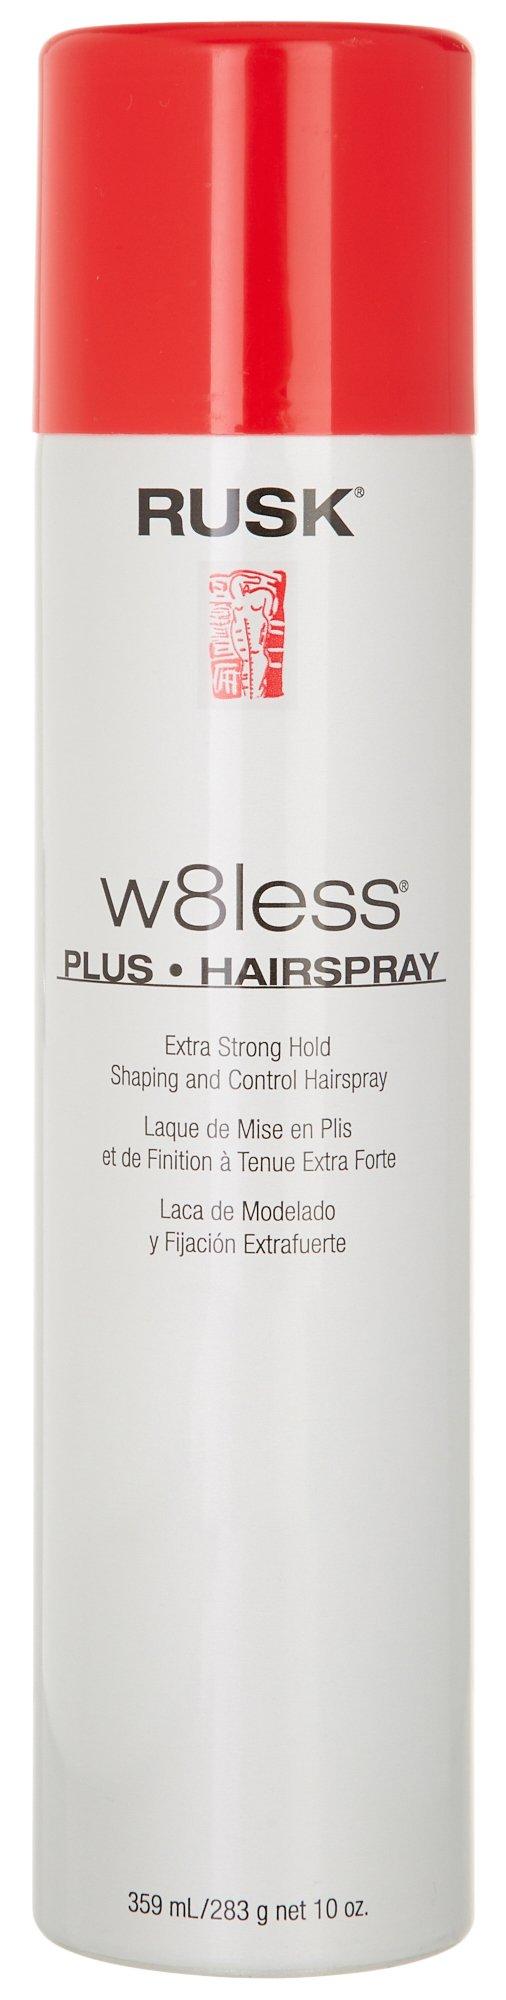 W8less Plus Extra Strong Hold Hairspray 10 oz.